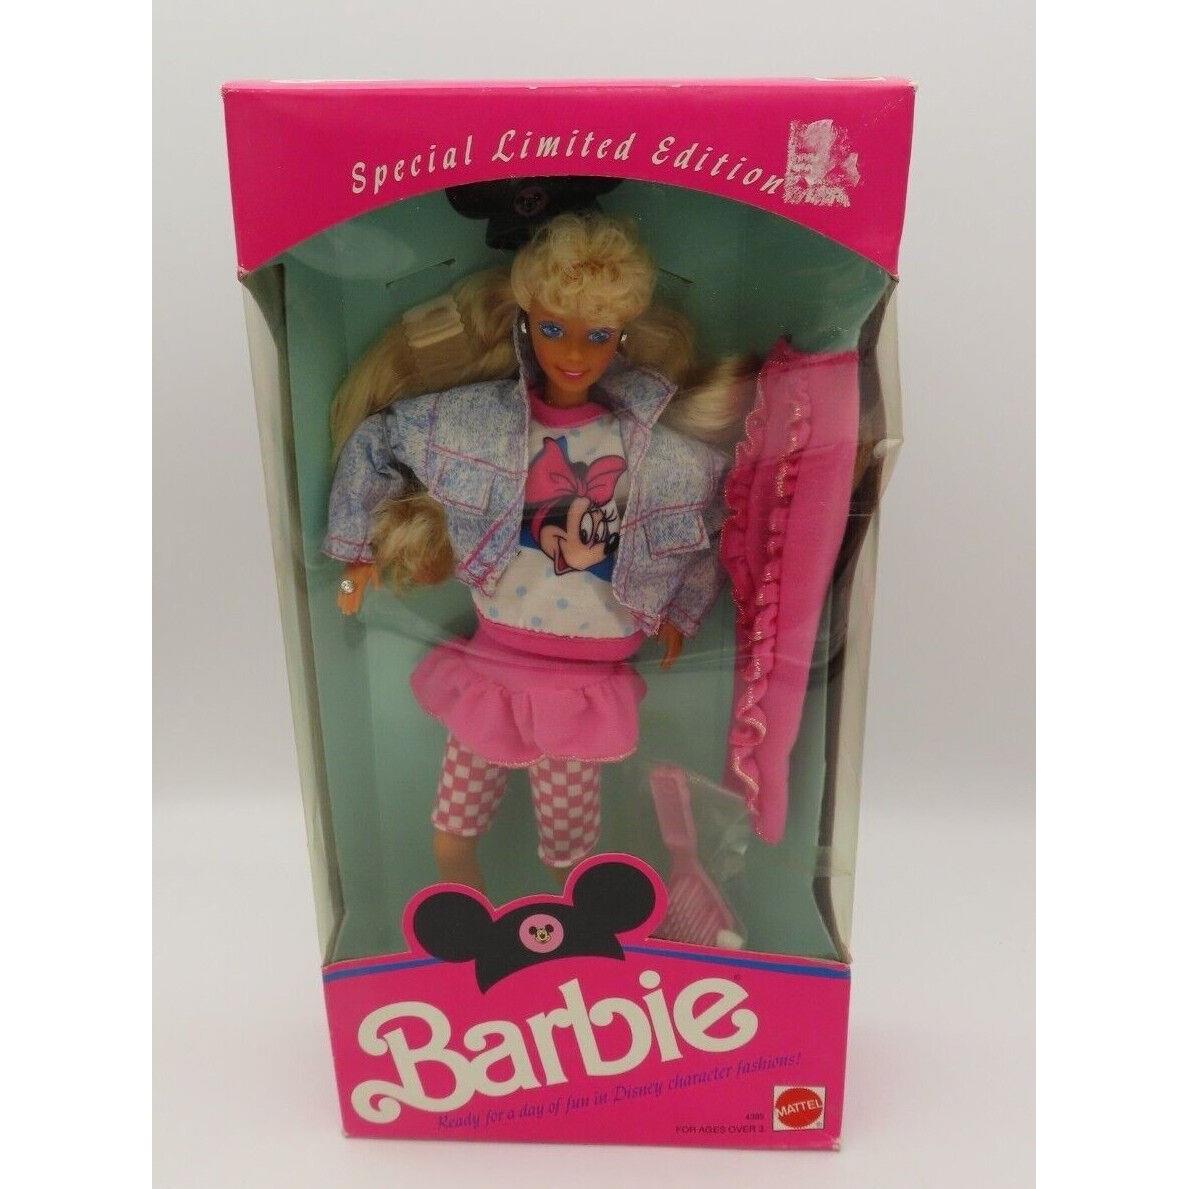 Barbie Disney Character Fashion Doll Special Limited Edition 1990 Mattel 4385